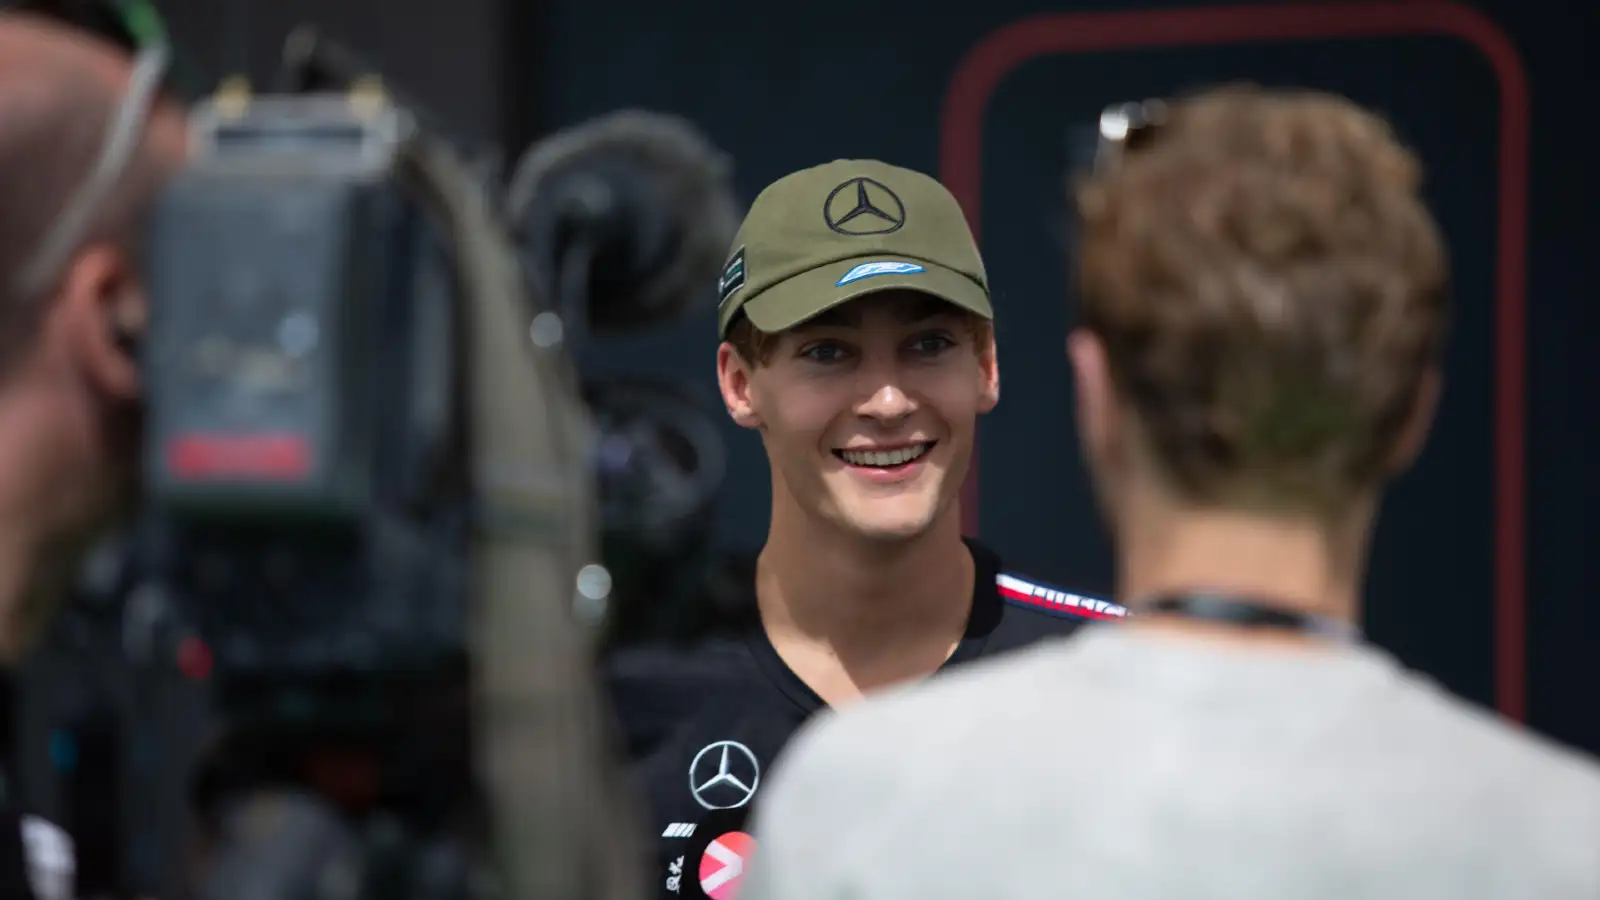 George Russell chats with media at the United States GP.